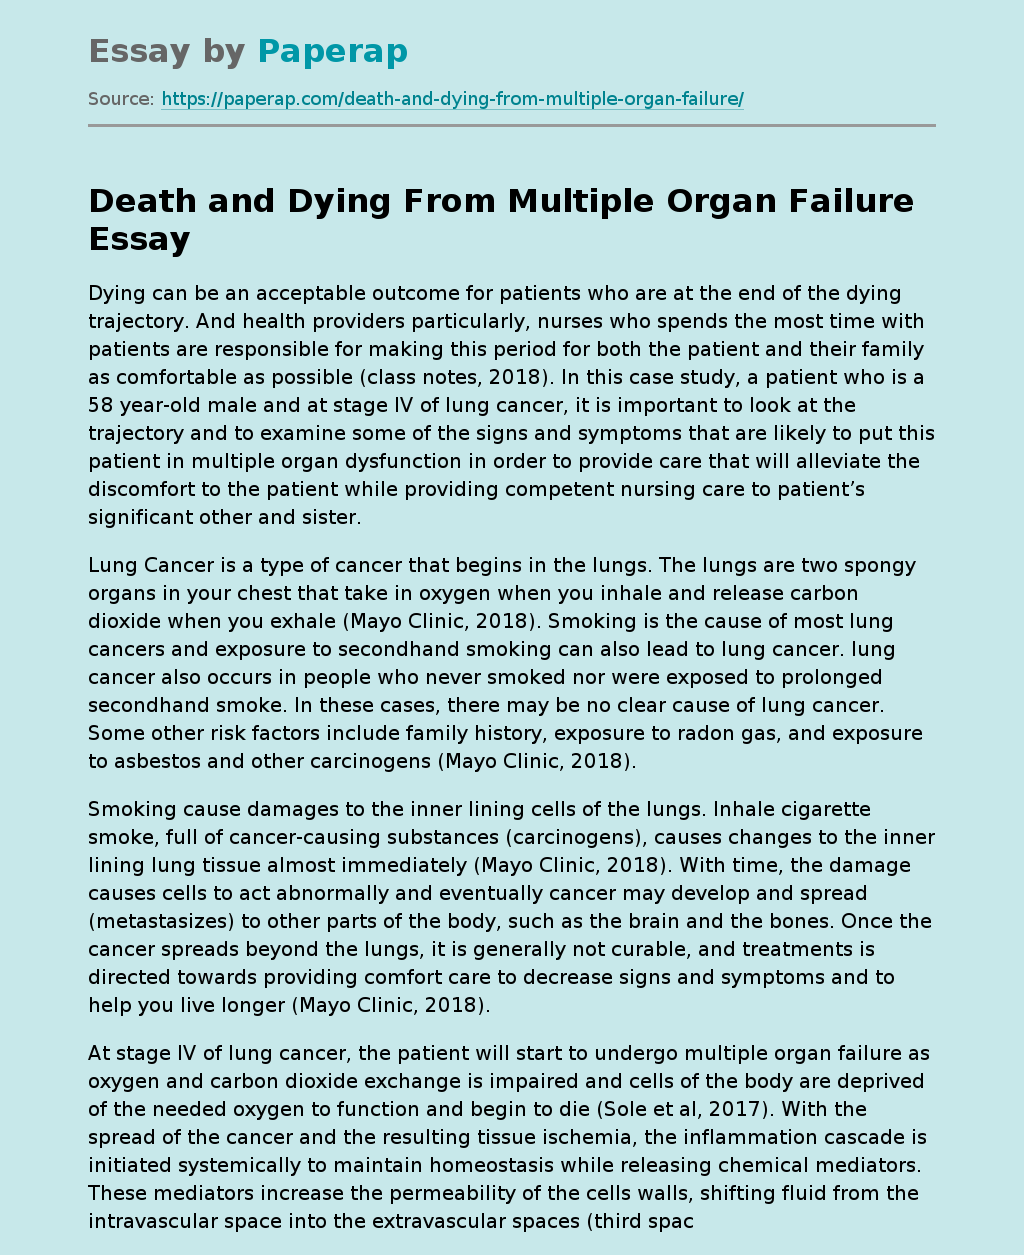 Death and Dying From Multiple Organ Failure